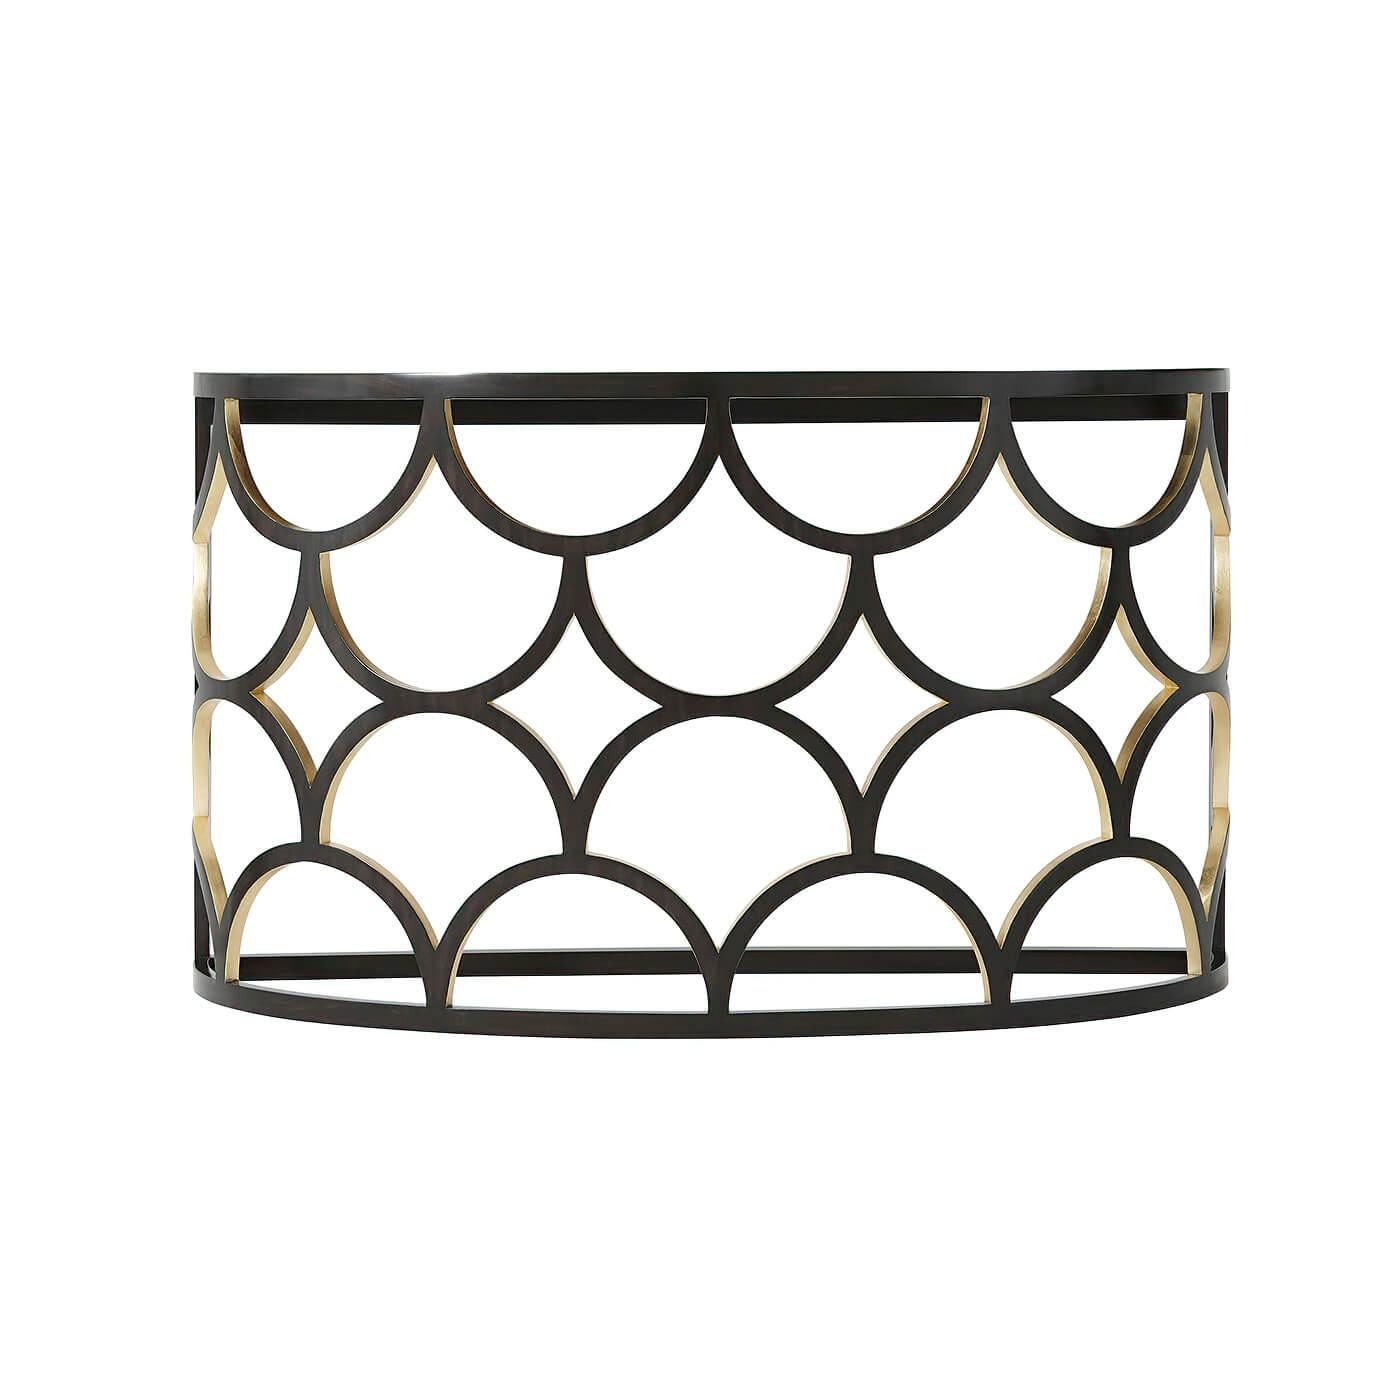 Modern demilune console with ebonized and hand gilt openwork trellis sides and a hand-leafed silver eglomise inset top.
Dimensions: 54